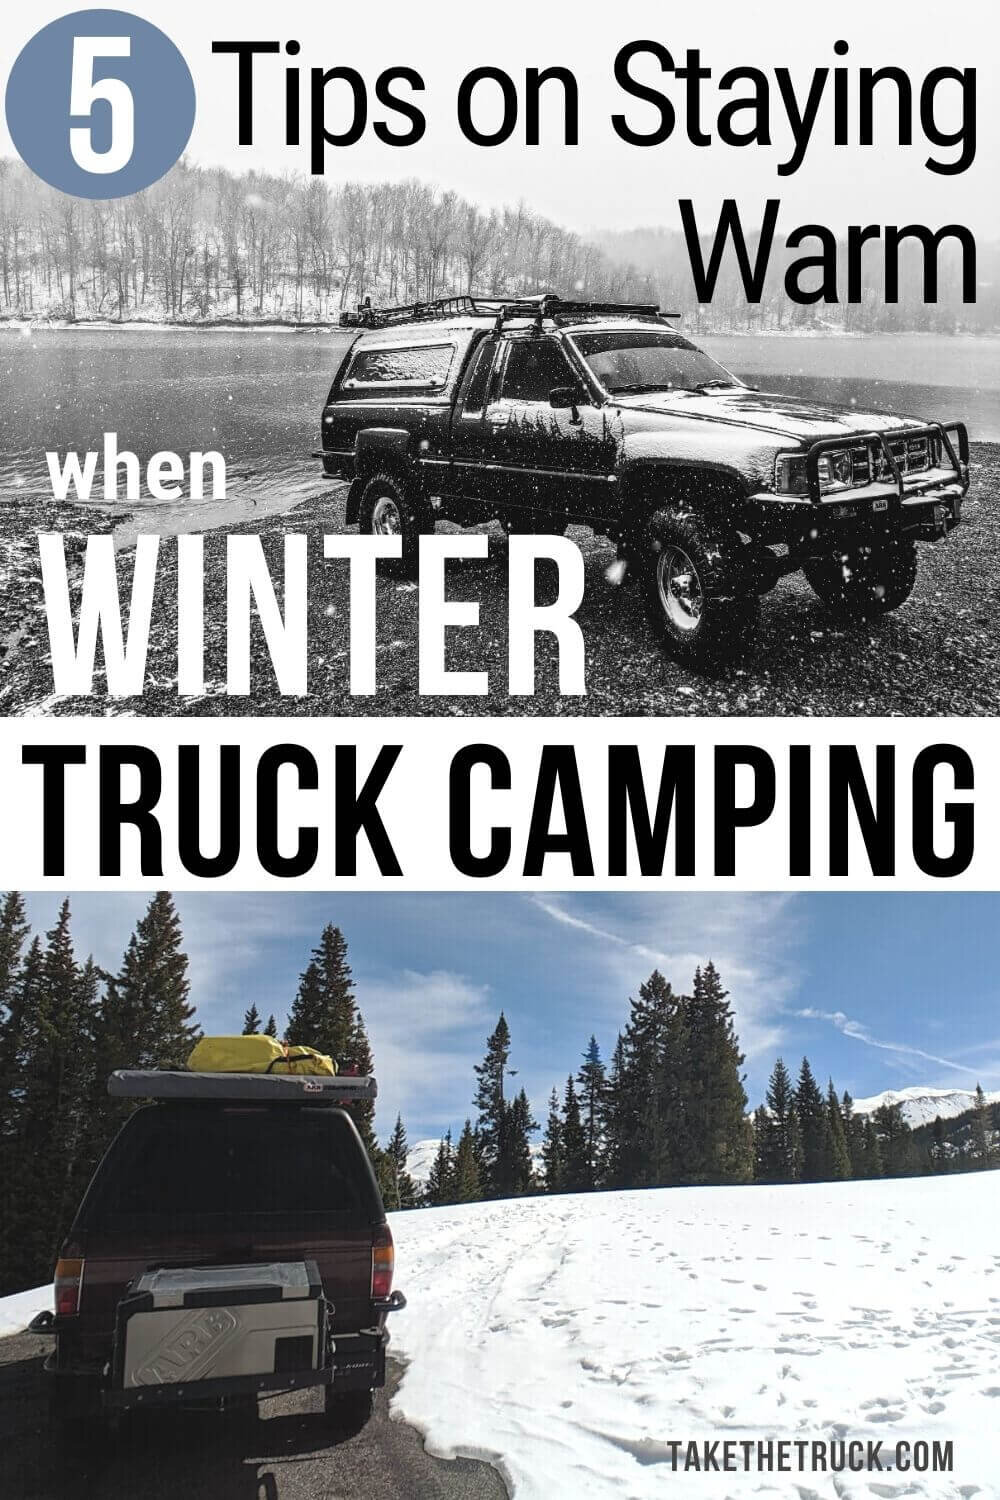 Winter truck camping doesn’t have to be uncomfortable! This post is full of ideas to help you stay warm and comfortable when doing some cold weather truck camping.